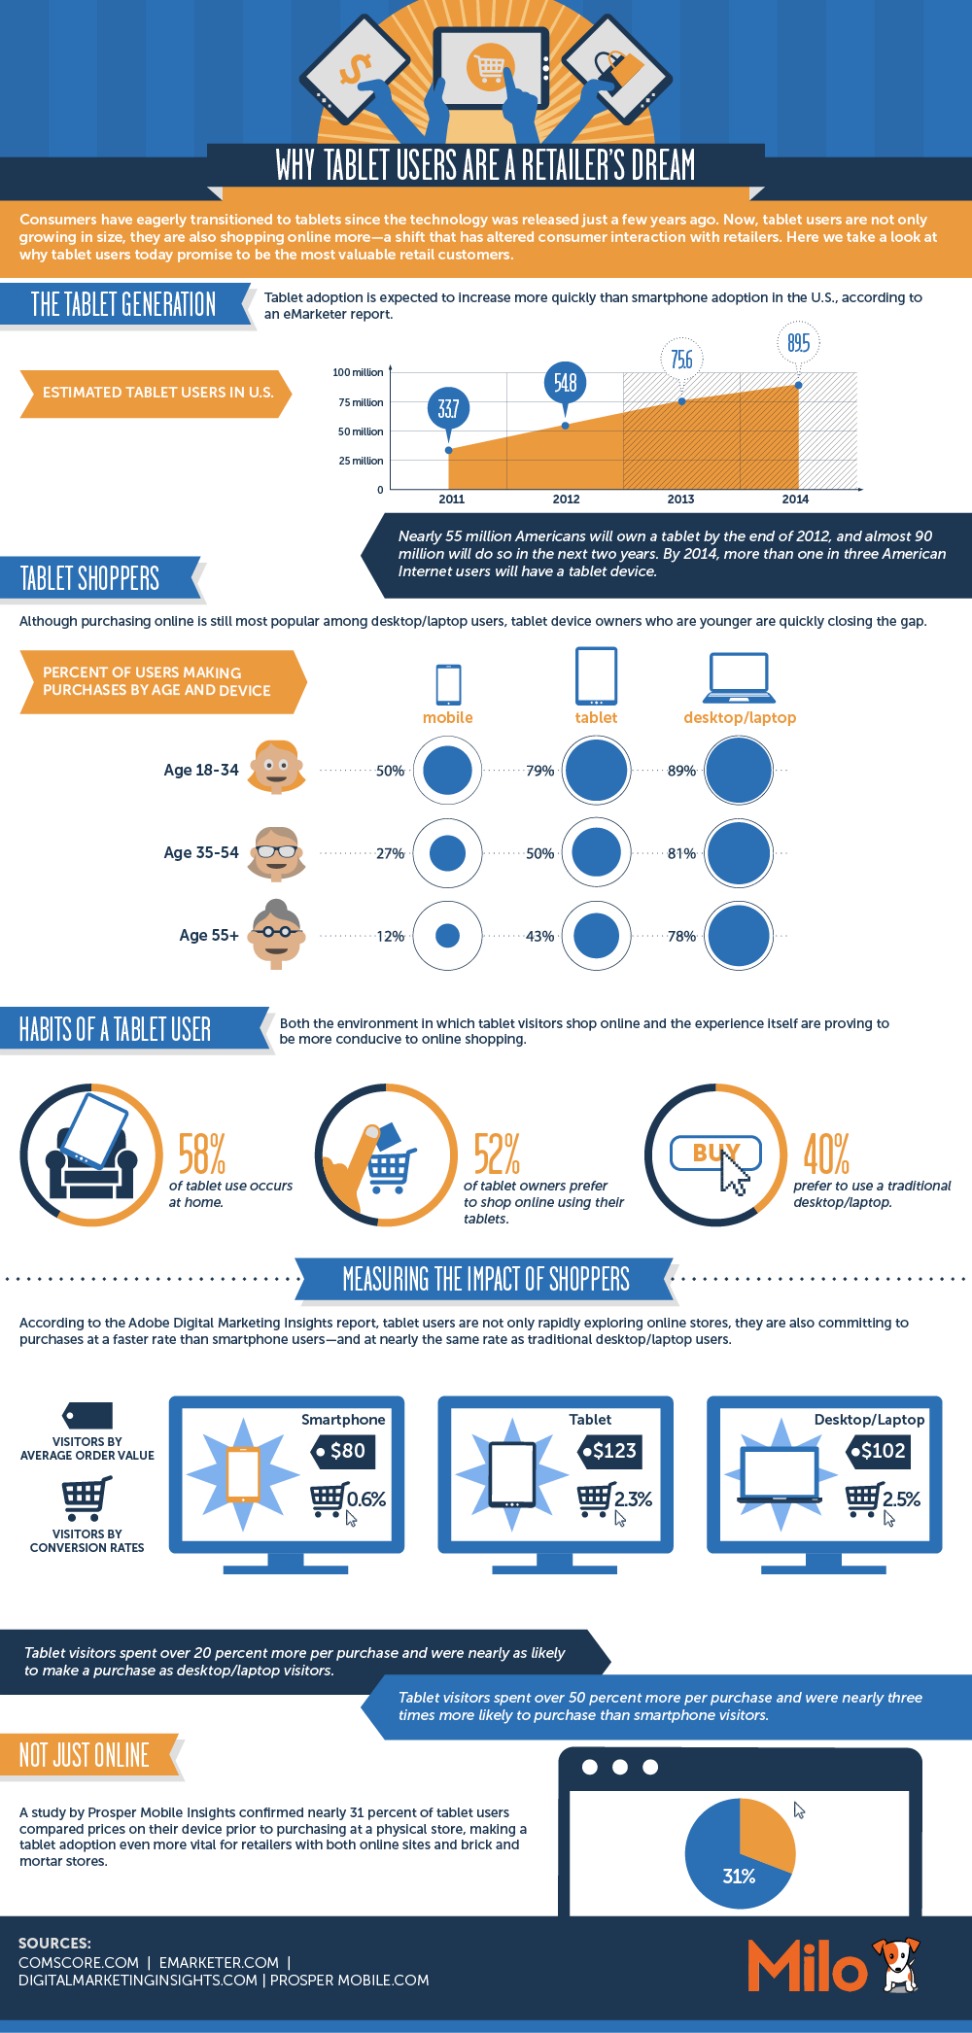 Tablets Are A Dream Come True For Retailers [INFOGRAPHIC]